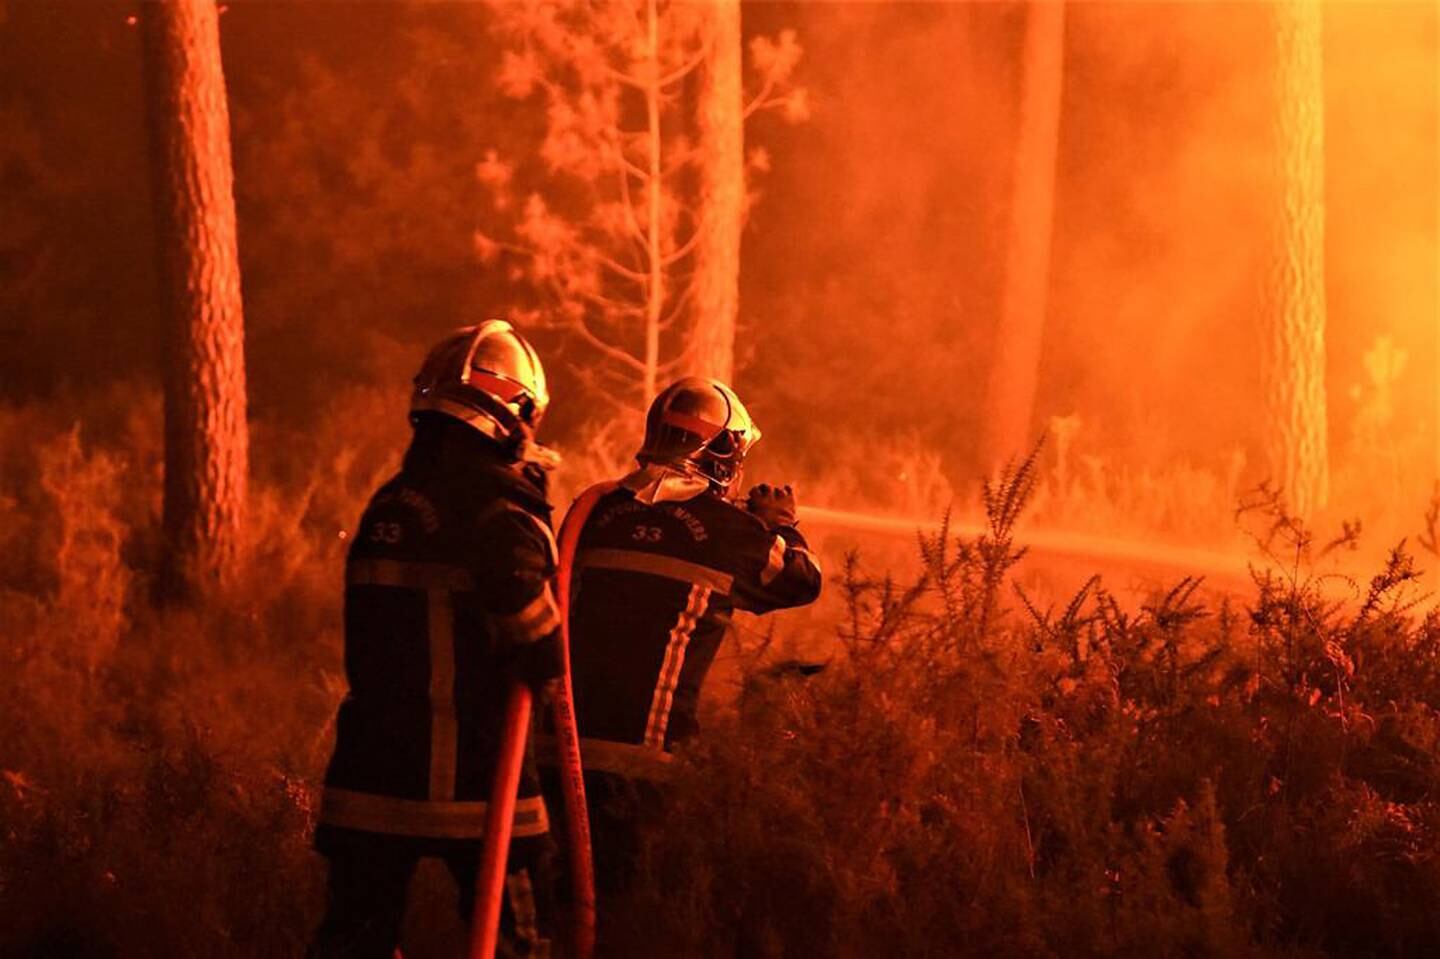 Firefighters battle a blaze at a forest in the Gironde region of south-western France. EPA